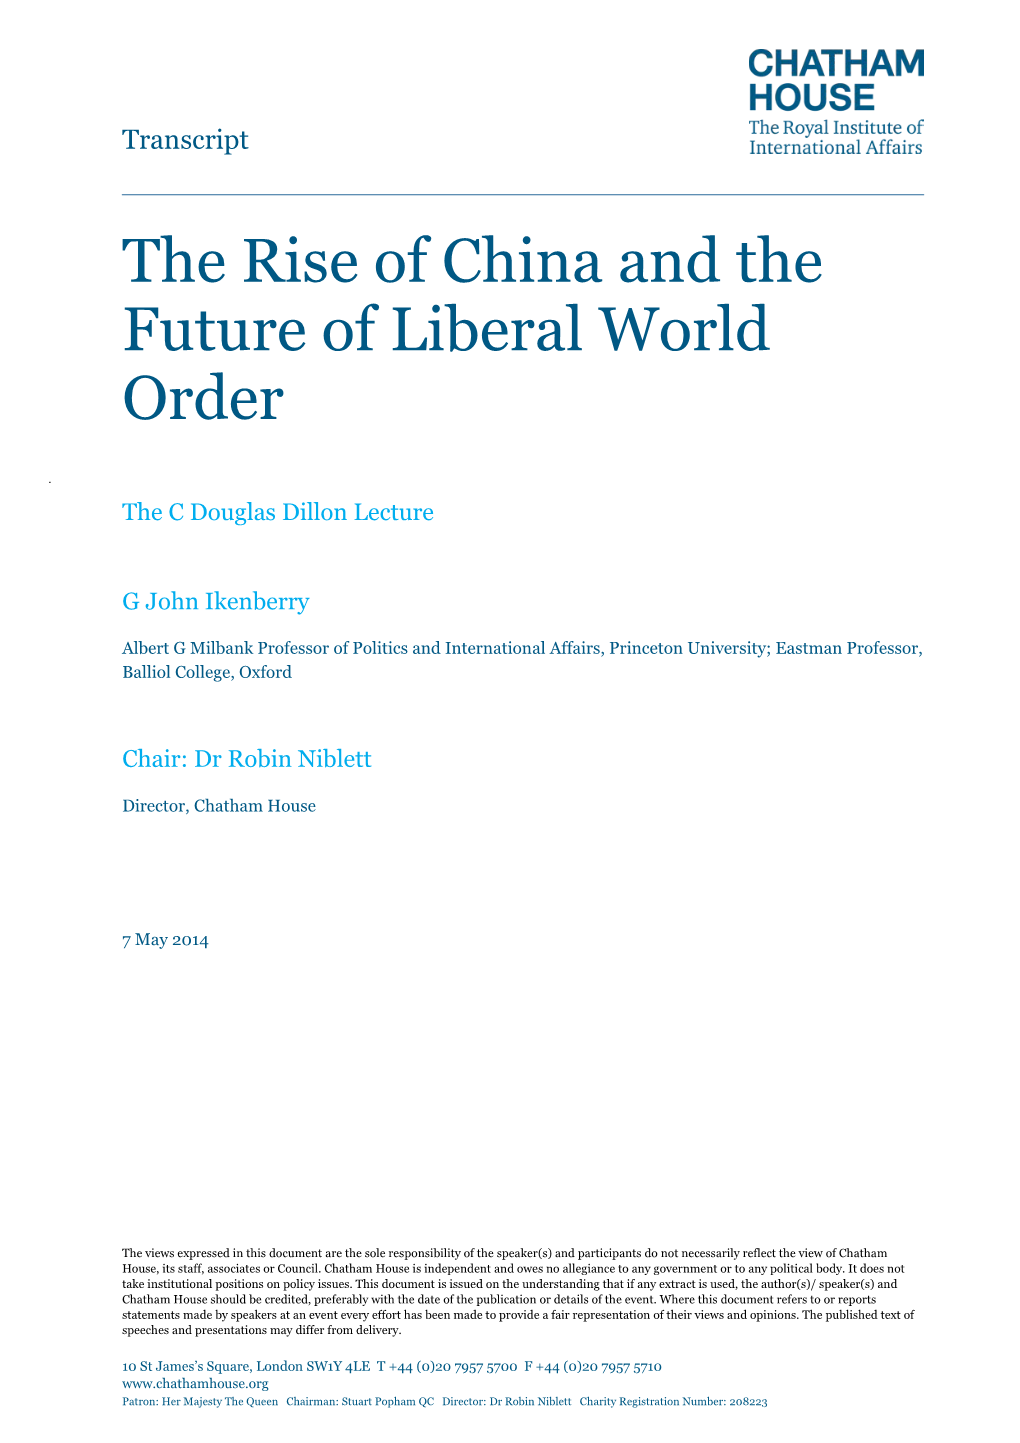 The Rise of China and the Future of Liberal World Order